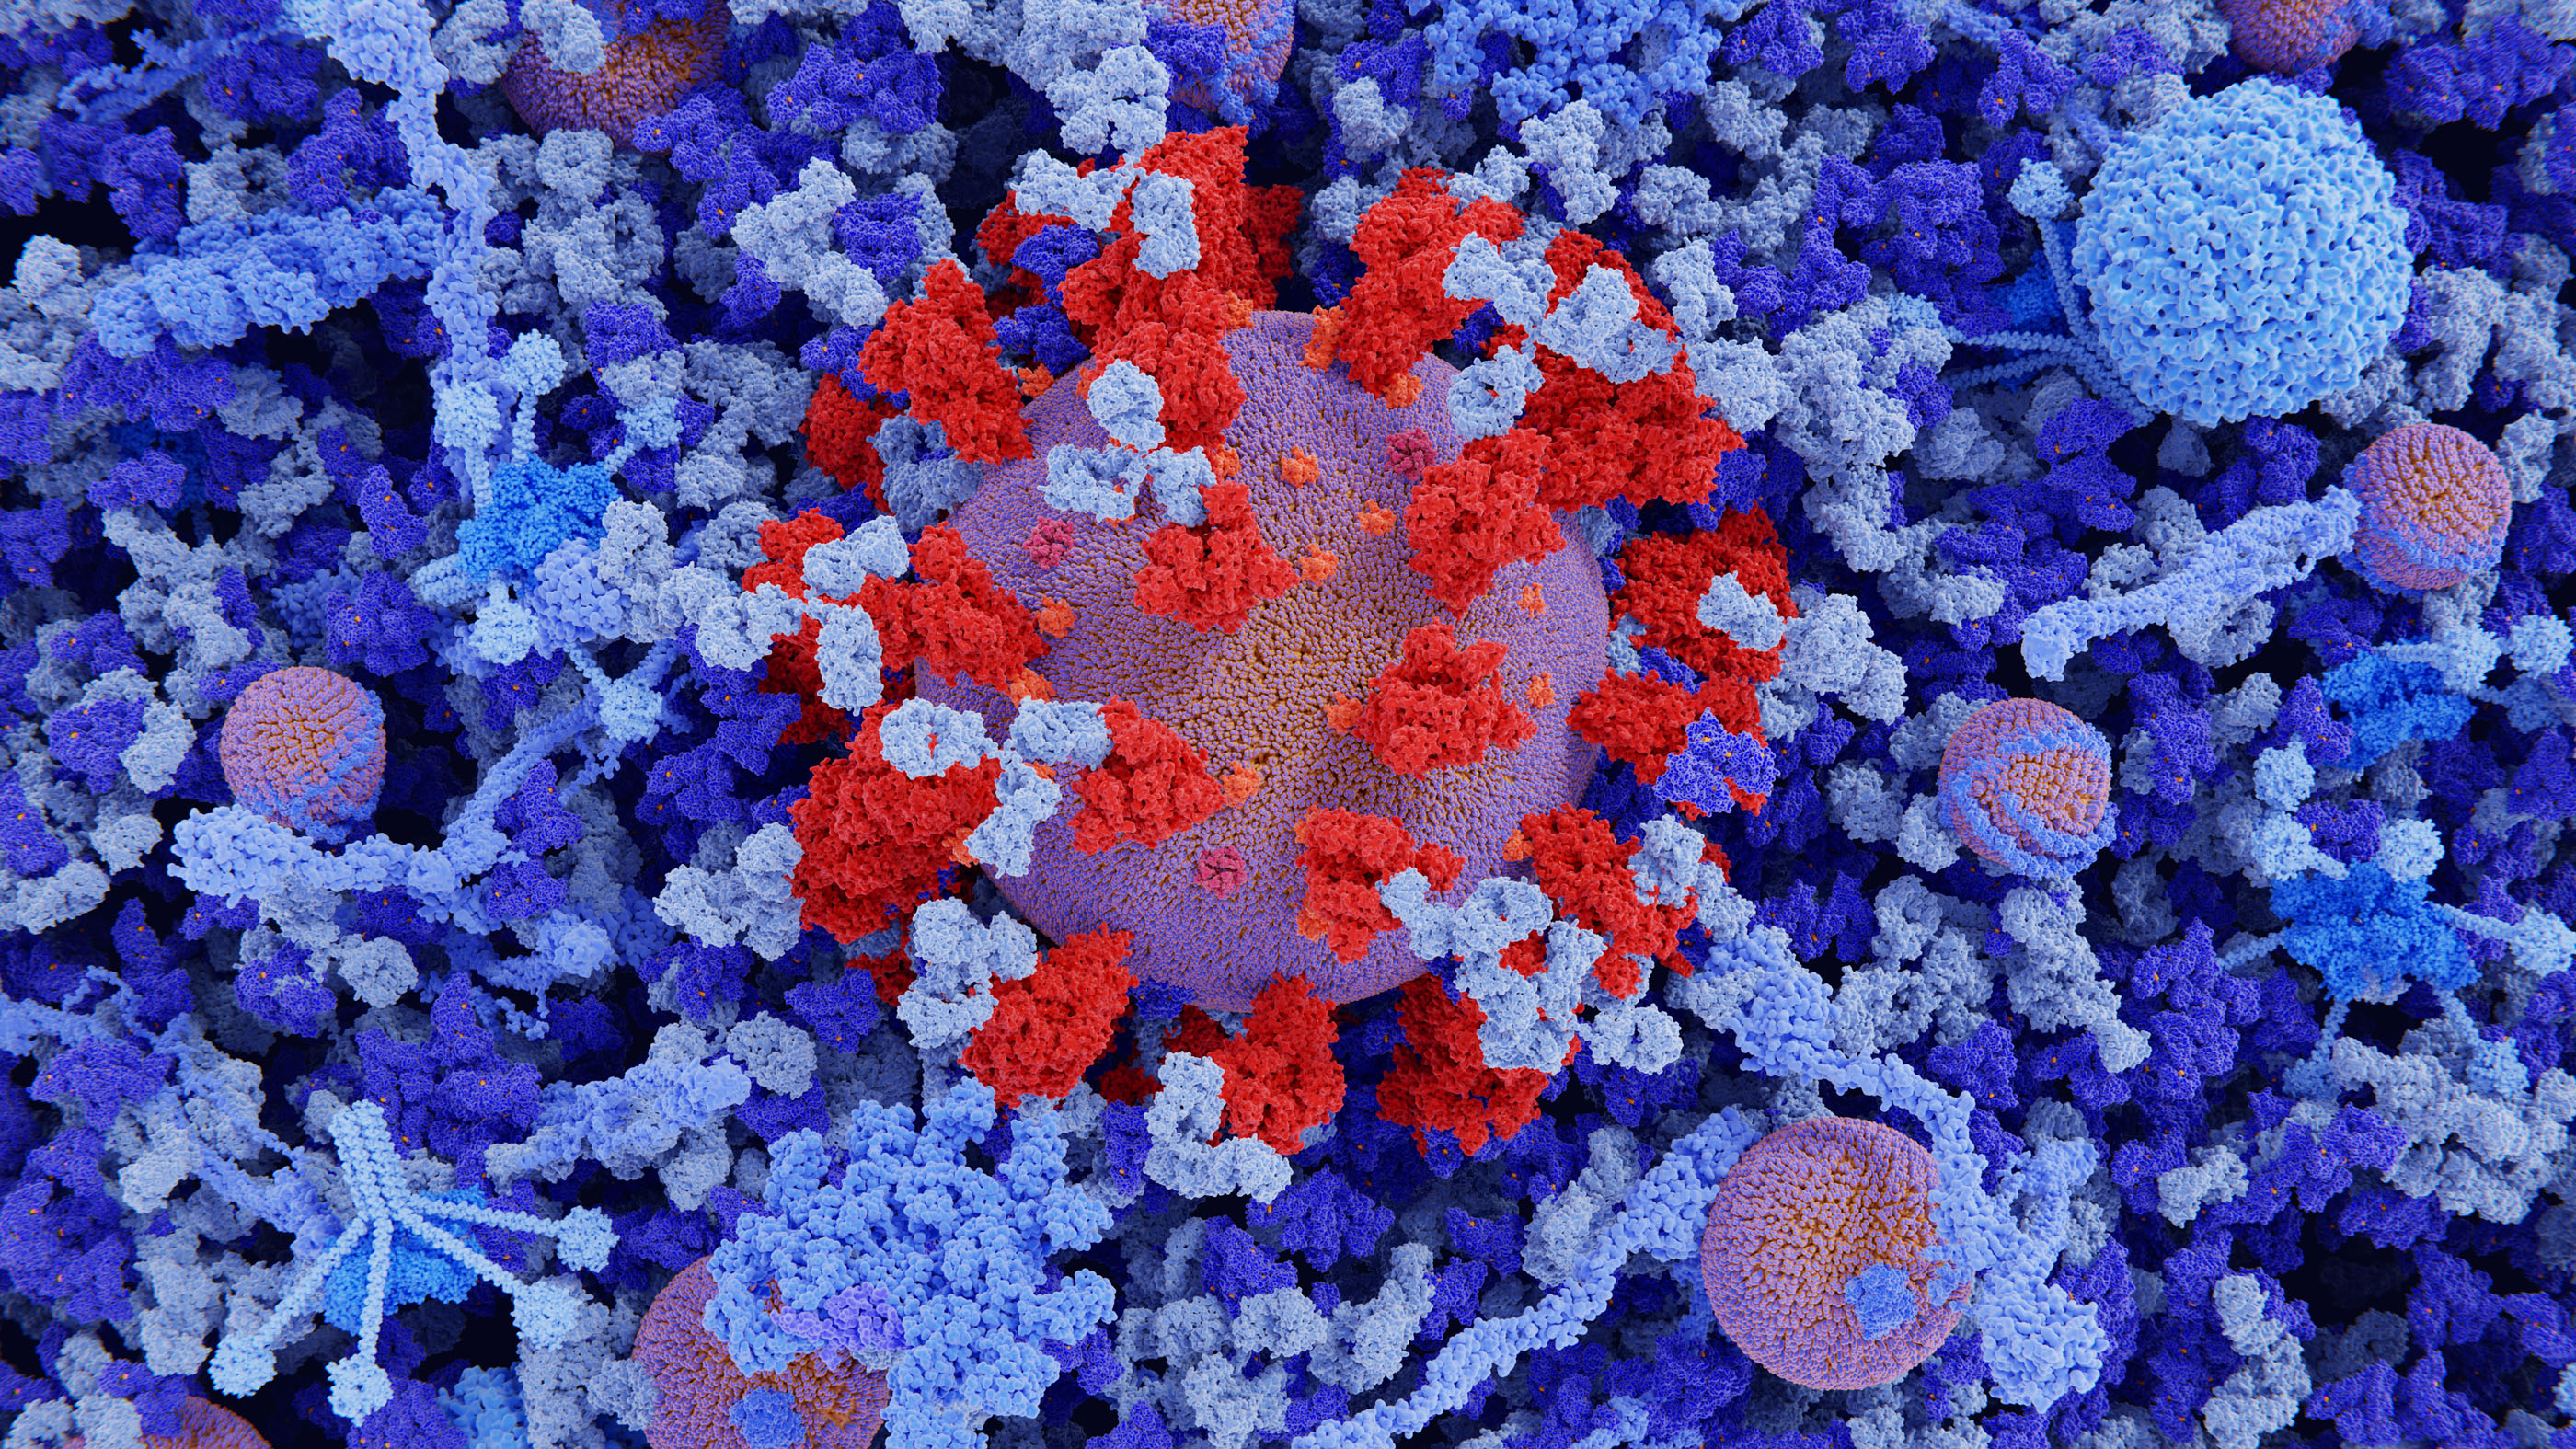 This illustration shows a coronavirus particle in blood plasma showing the Y-shaped immunoglobulin G antibodies (IgG, light blue) bound to the coronavirus' spike proteins (red). IgG antibodies are Y-shaped proteins produced by B-lymphocyte white blood cells as part of an immune response. Immunoglobulin M antibodies (IgM) are also shown in light blue.